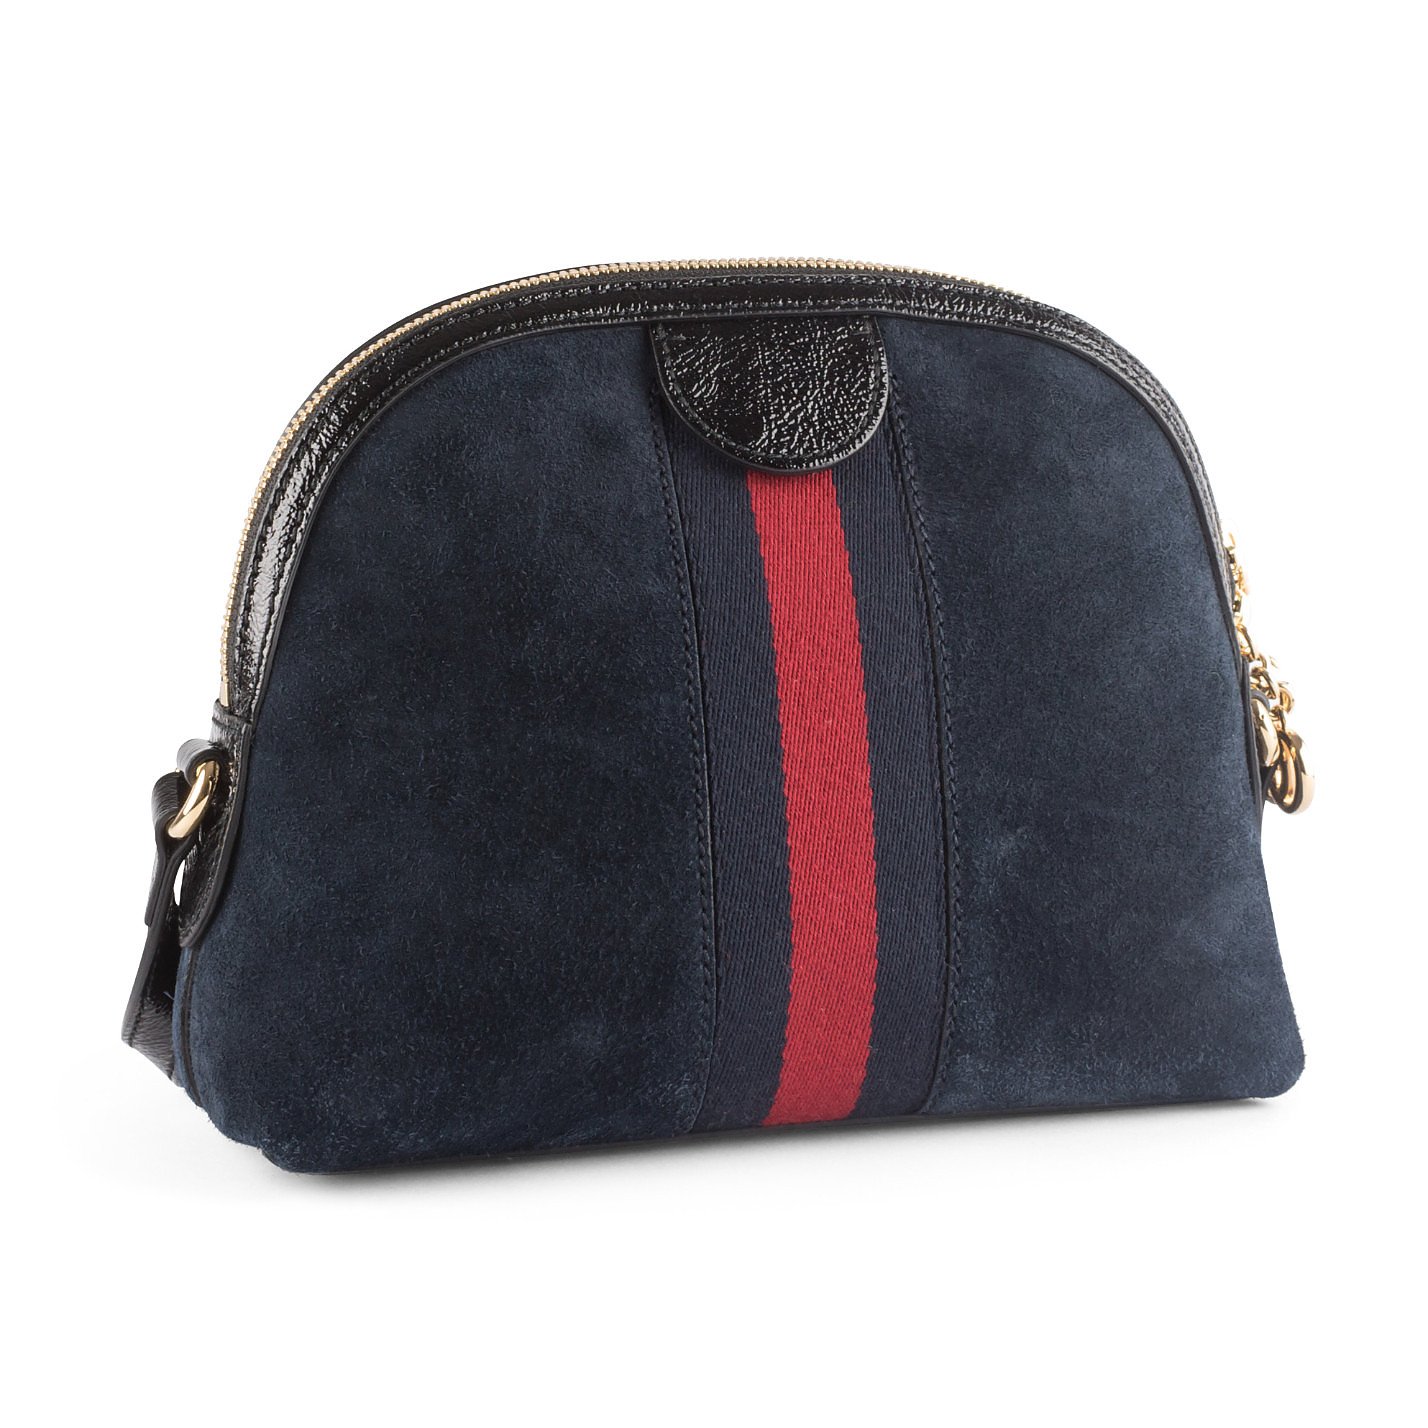 Rent or Buy Gucci Dome Ophidia Small Suede Shoulder Bag from www.myhandbagsusa.com/louis-vuitton/